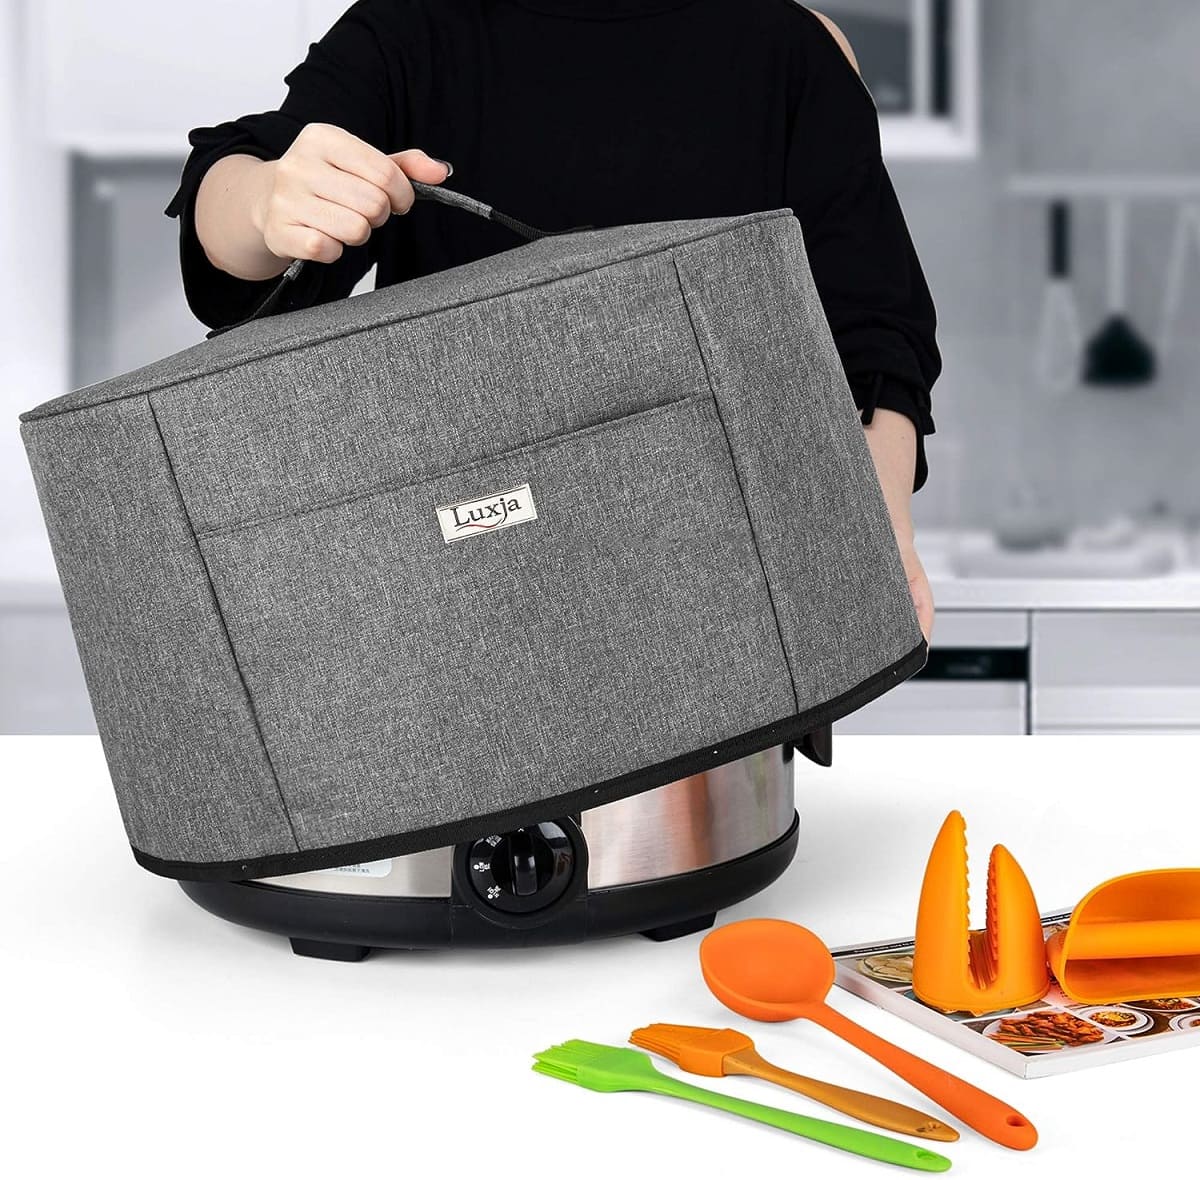  HOMEST Dust Cover with Pockets for Instant Pot 6 Quart